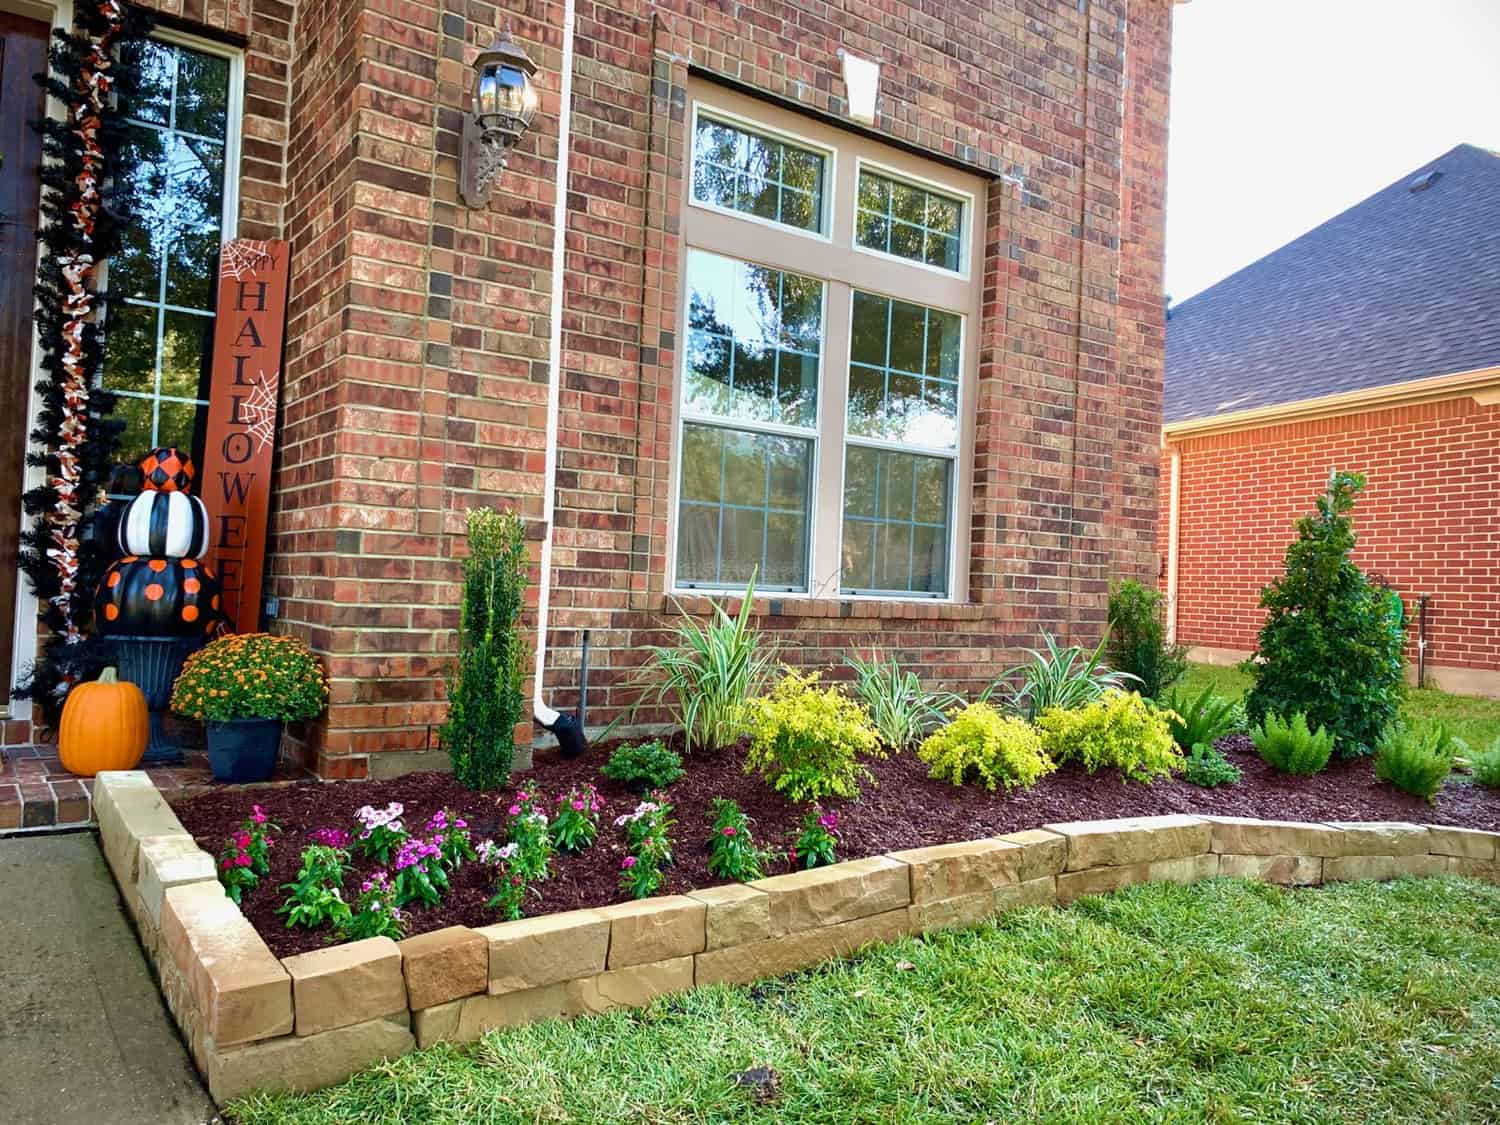 landscaping work done in Houston, Texas residence